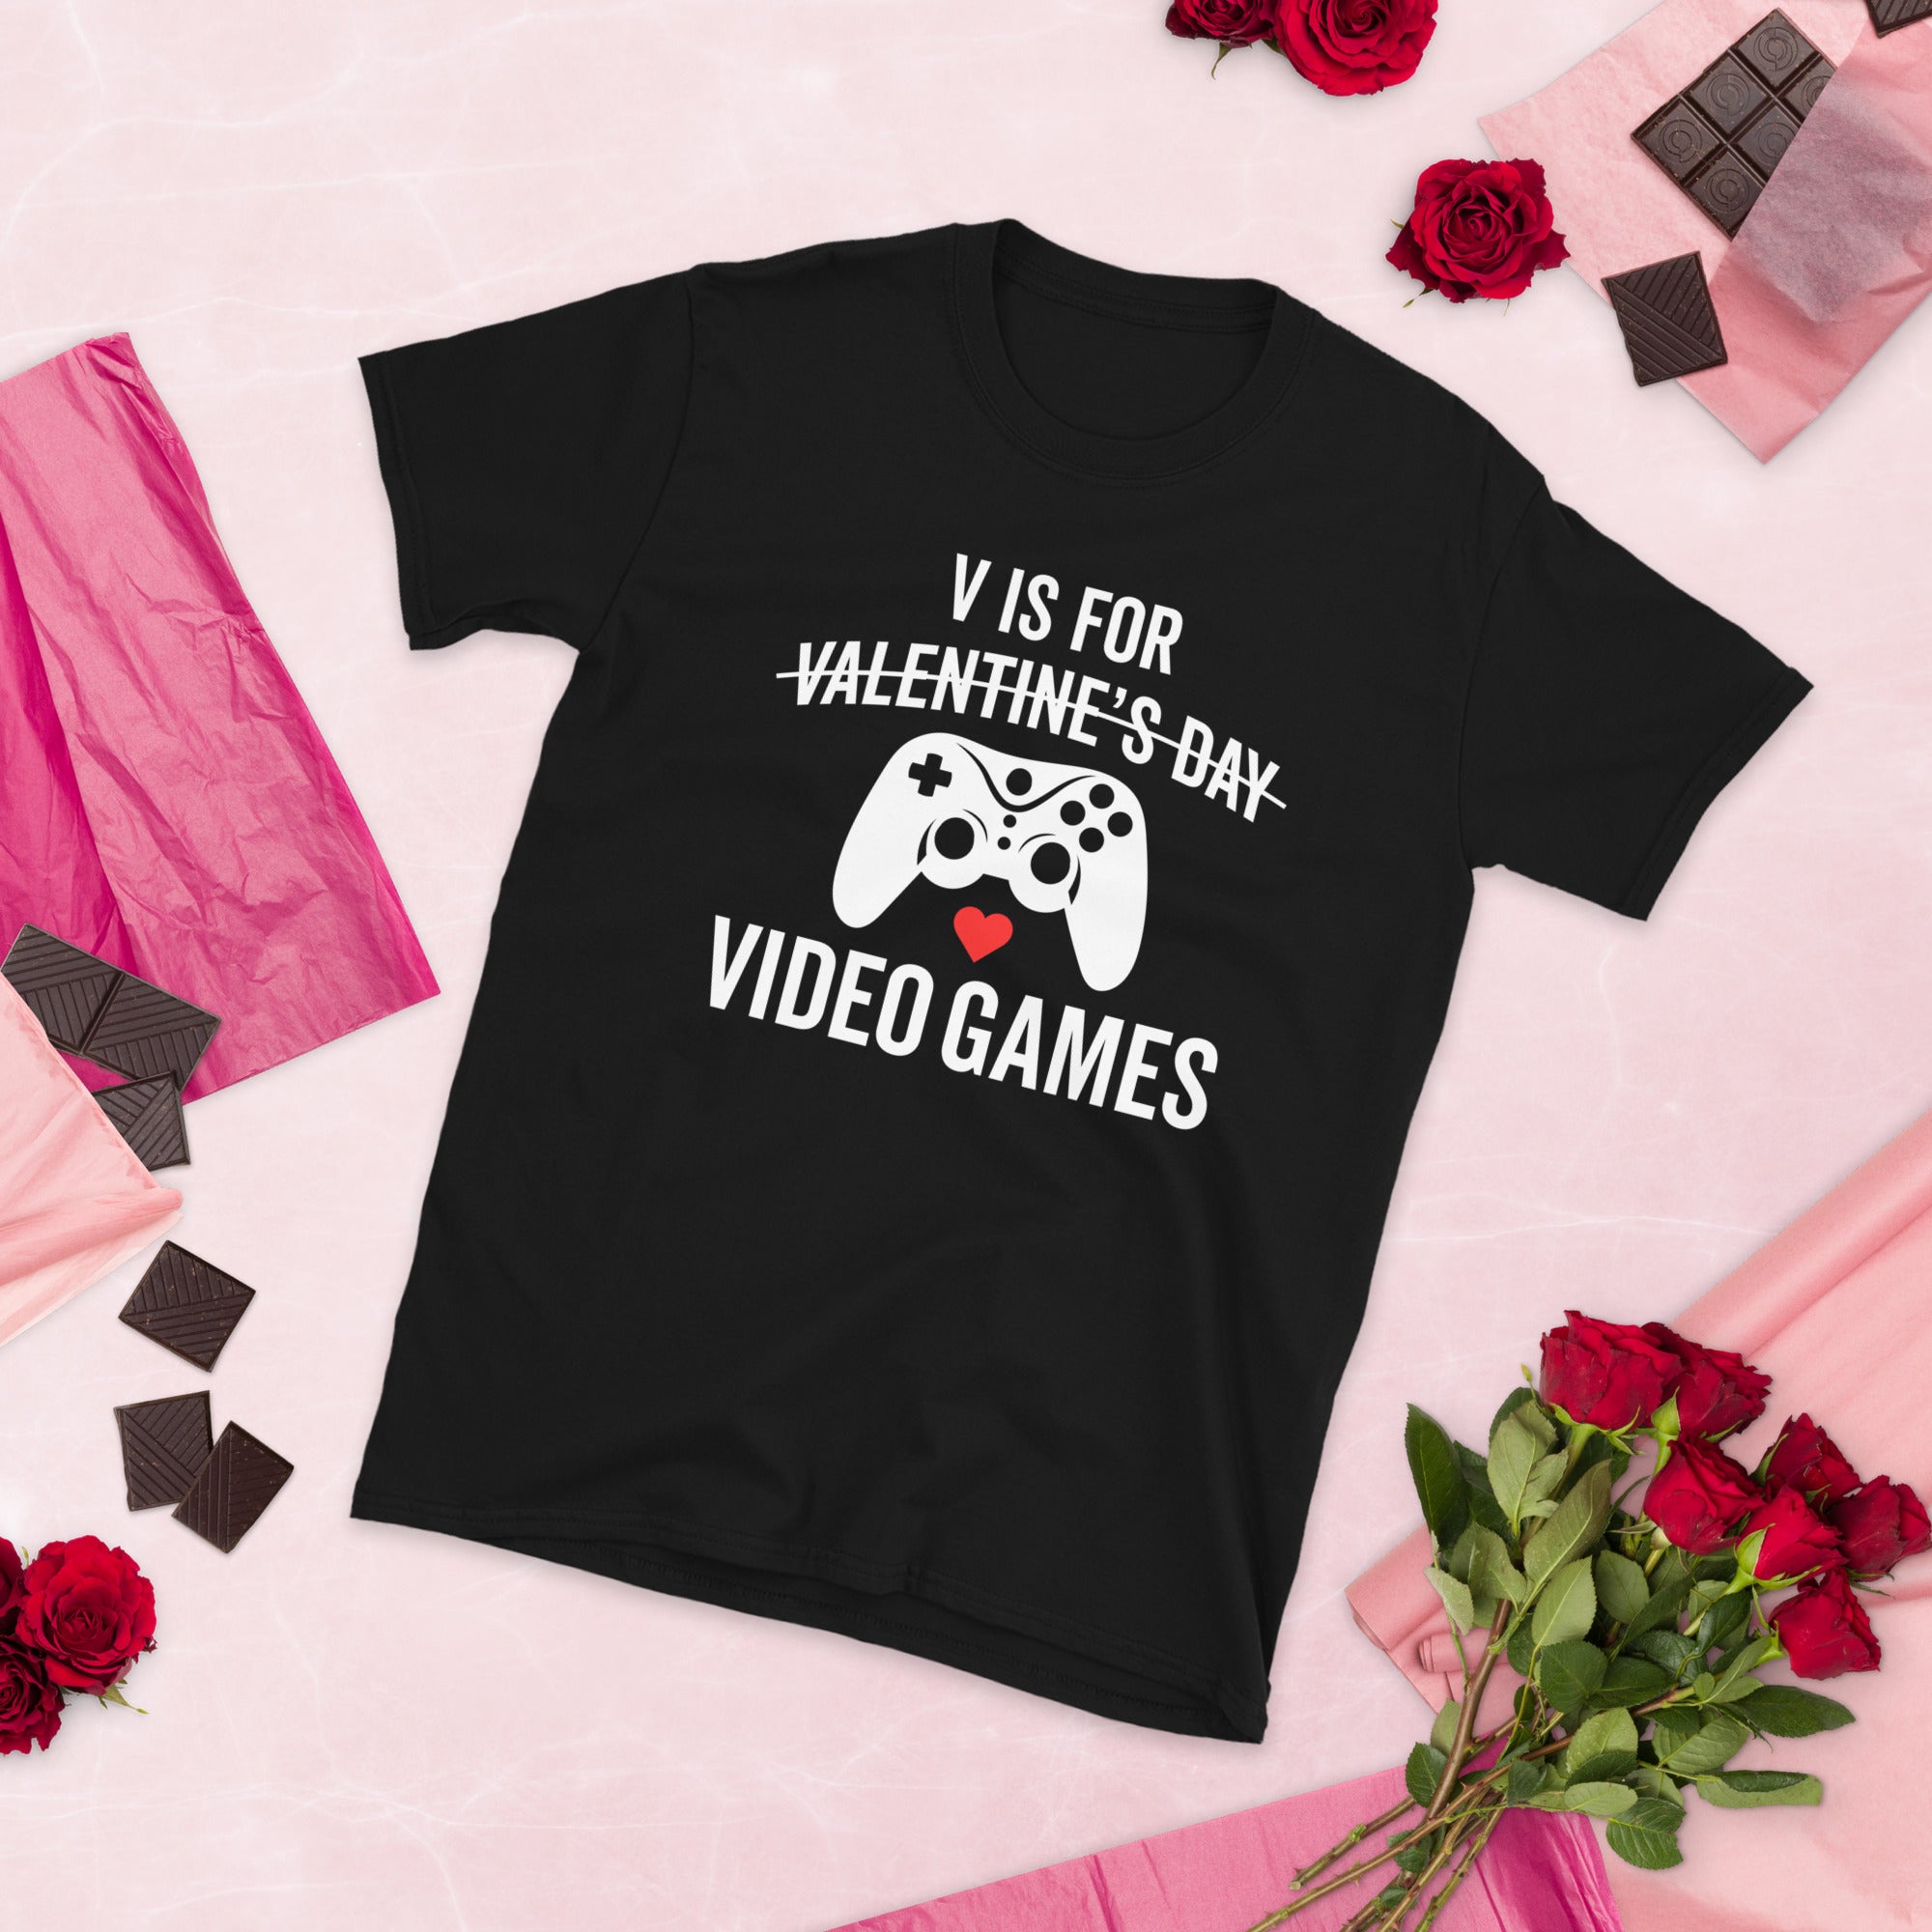 V Is For Video Games Shirt, Video Game TShirt, Gifts For Gamers, Game Lover T Shirt, Valentines Day Gaming Shirt , Funny Gaming Shirts - Madeinsea©